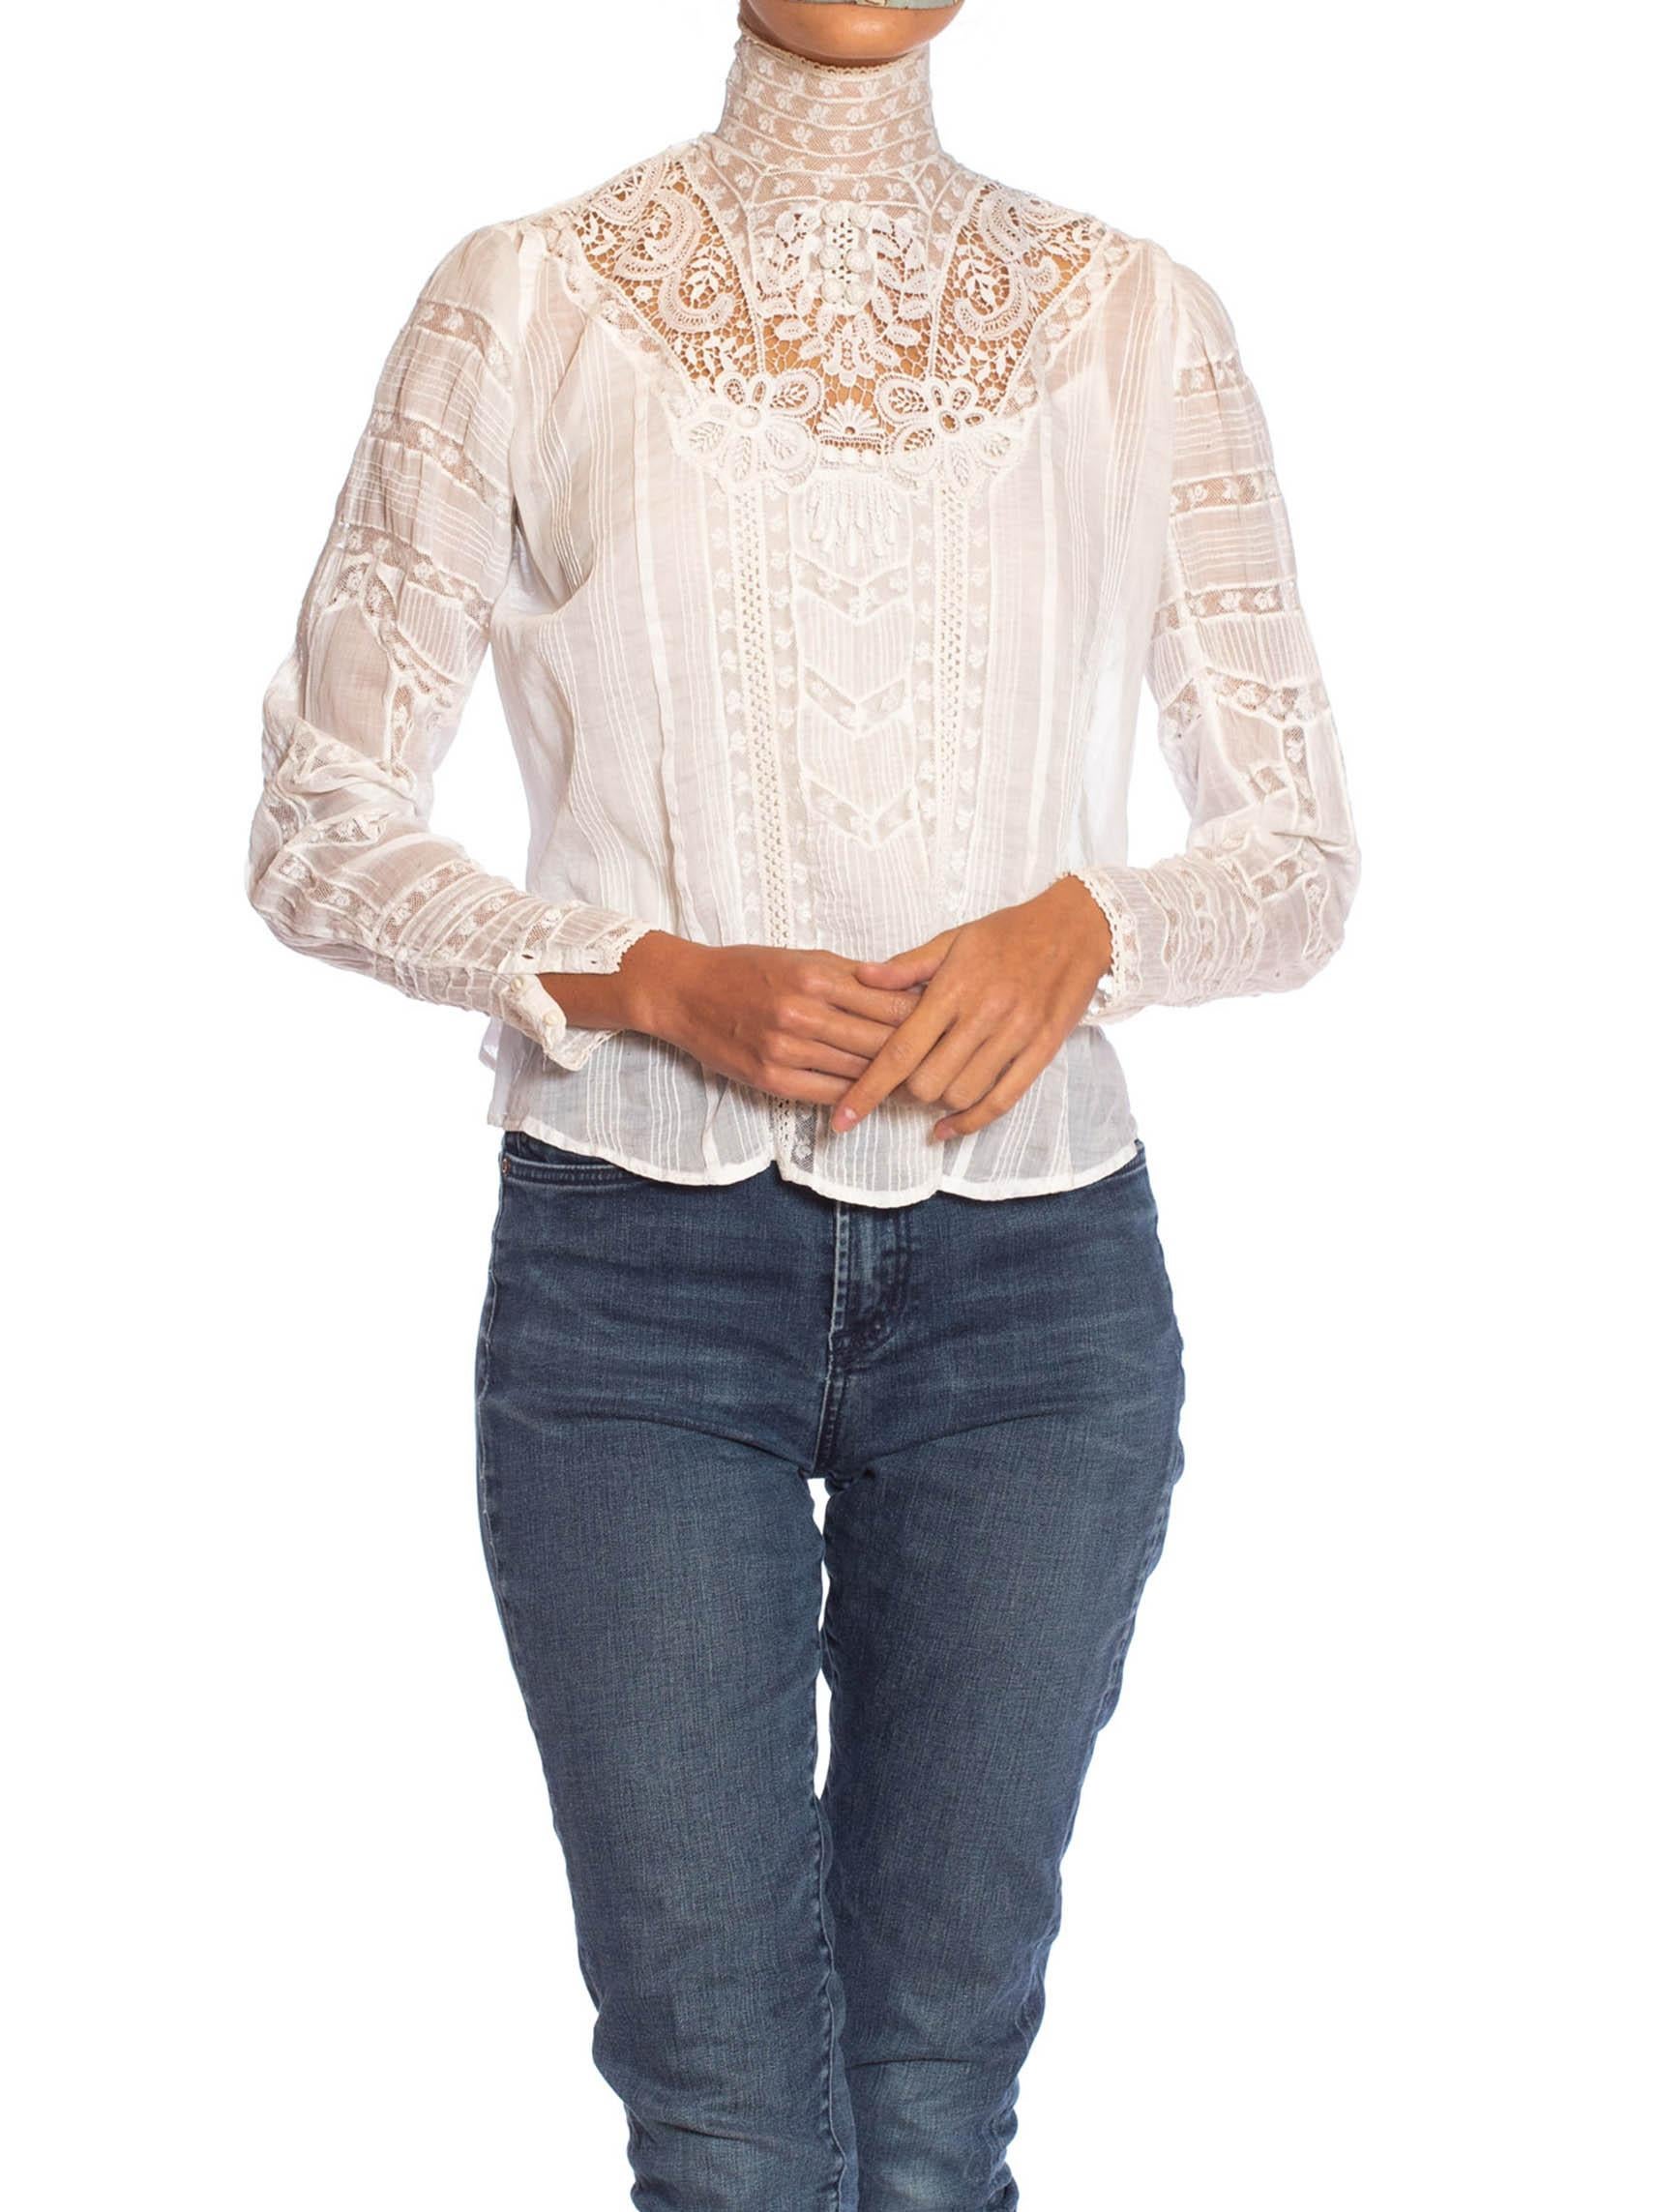 Victorian White Organic Cotton Voile & Floral Lace Swan Neck Blouse With Irish Crochet Styled Details